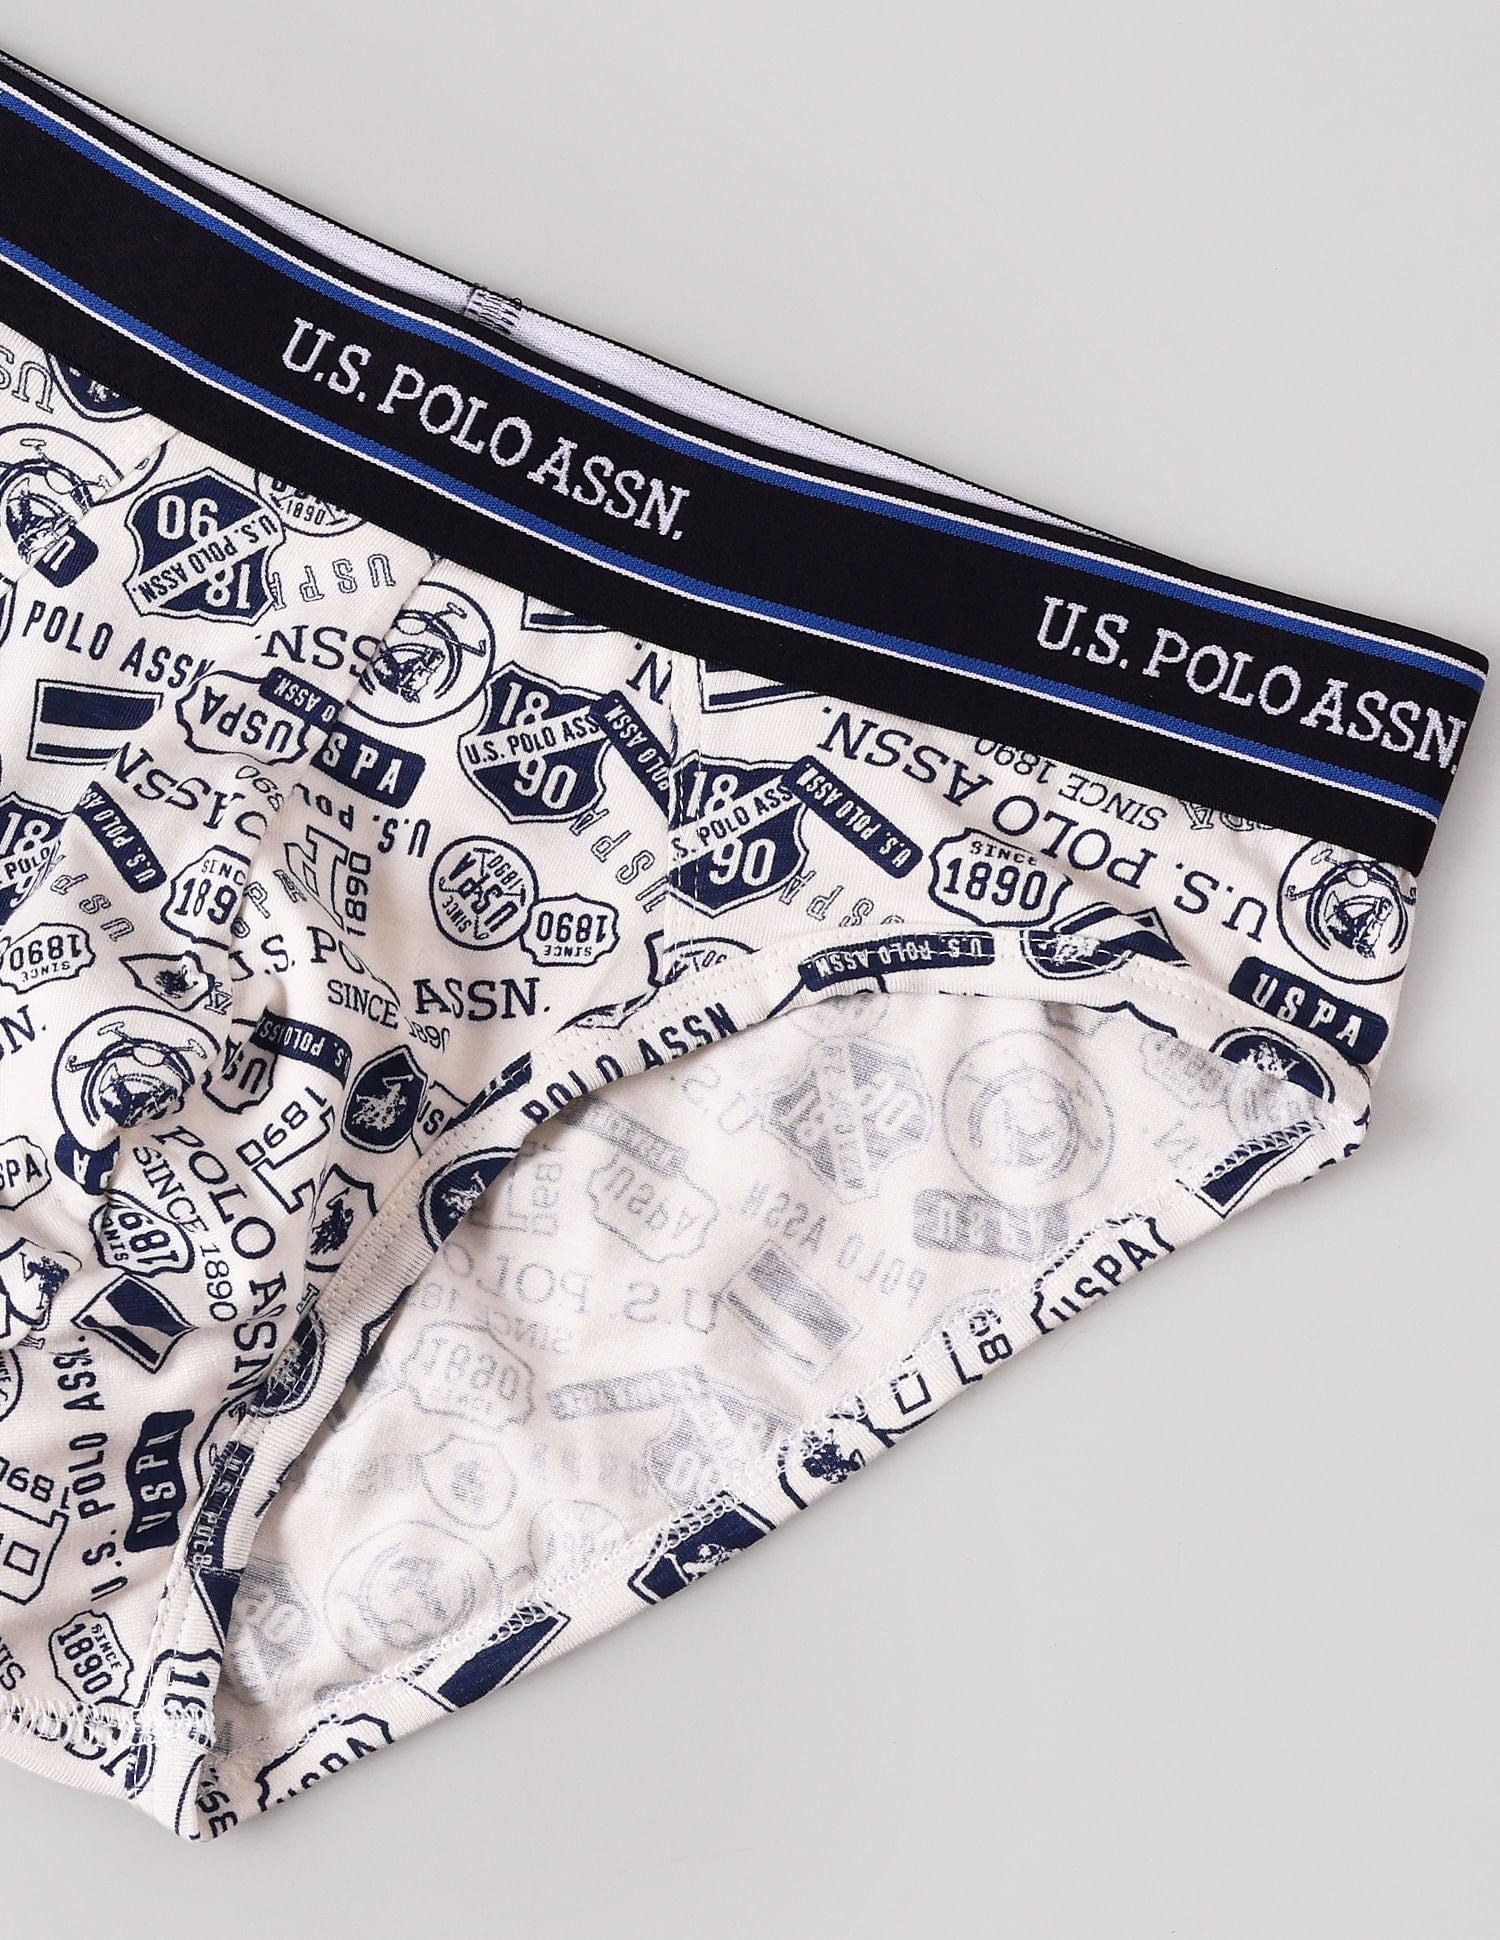 Buy USPA Innerwear Printed Cotton Stretch Jersey I615 Briefs - Pack Of 1 